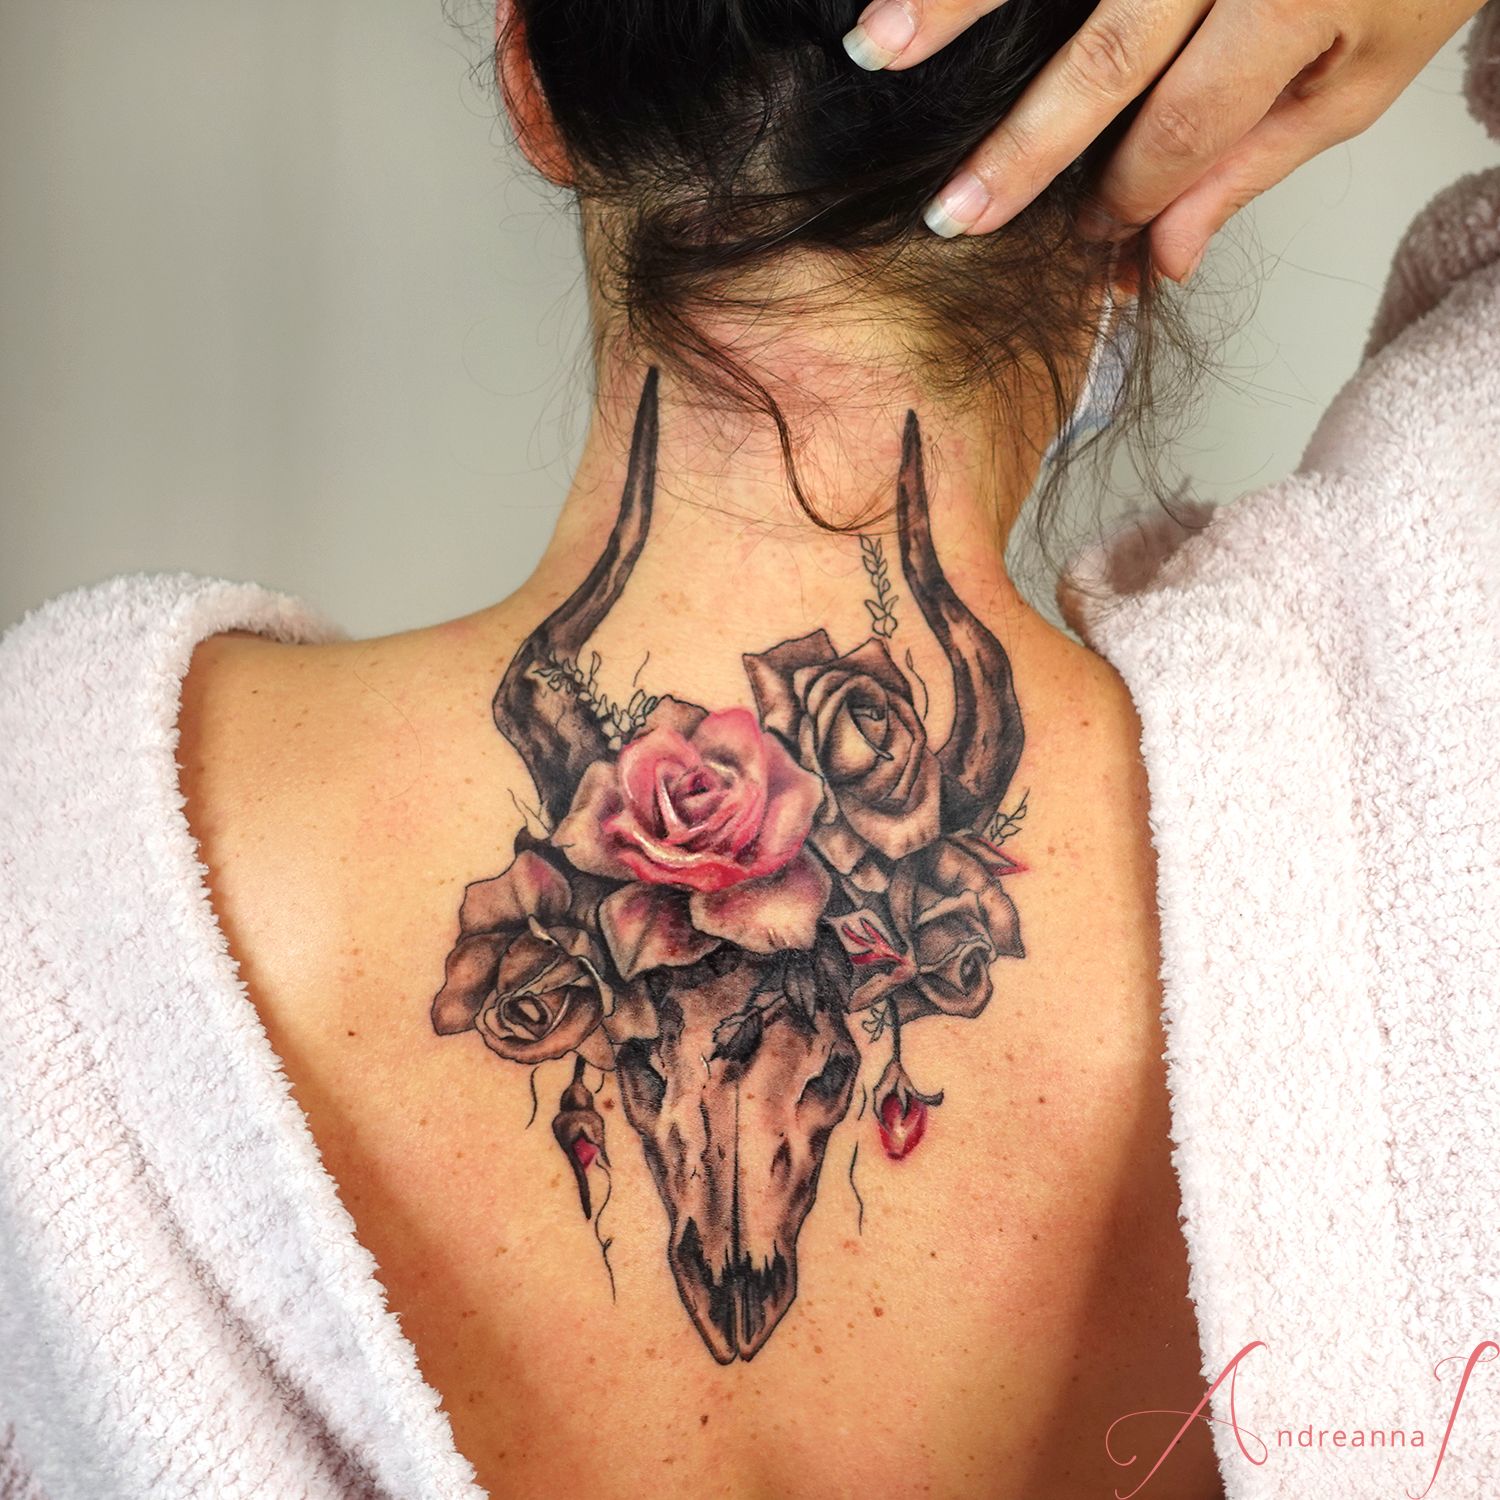 Details more than 148 animal skull tattoo with flowers